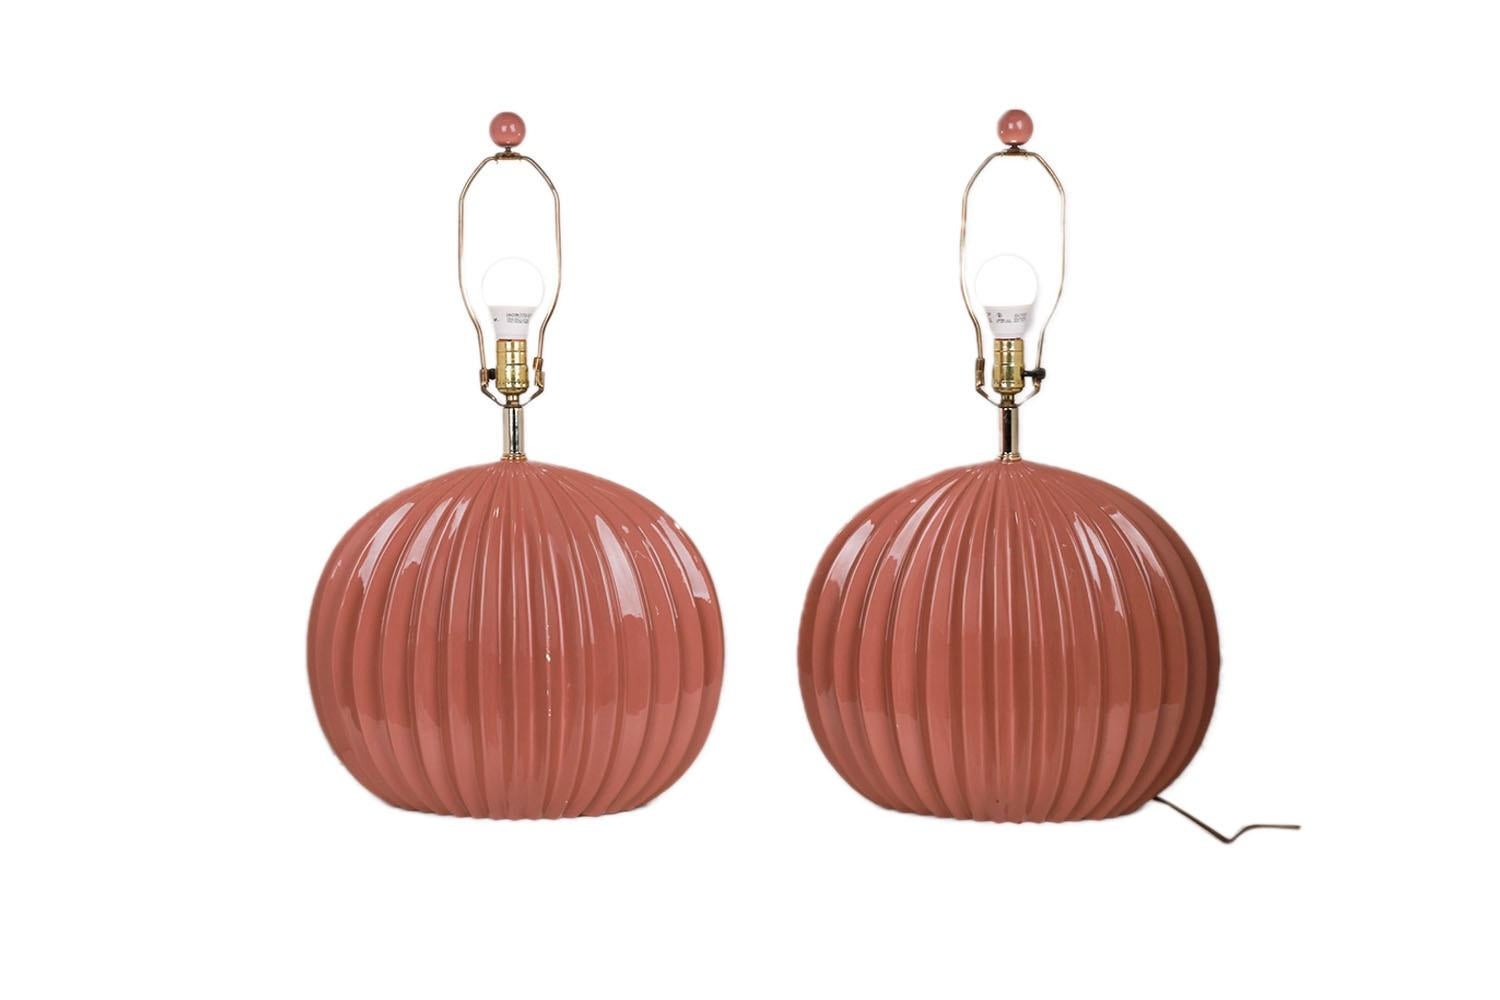 A beautiful pair of post-modern, flattened sphere-shaped ceramic table lamps with original empire shape shades, circa 1980s. They feature a striking high gloss dusty rose or mauve glaze shell-like body adorned with a sculptural ribbed pattern, each